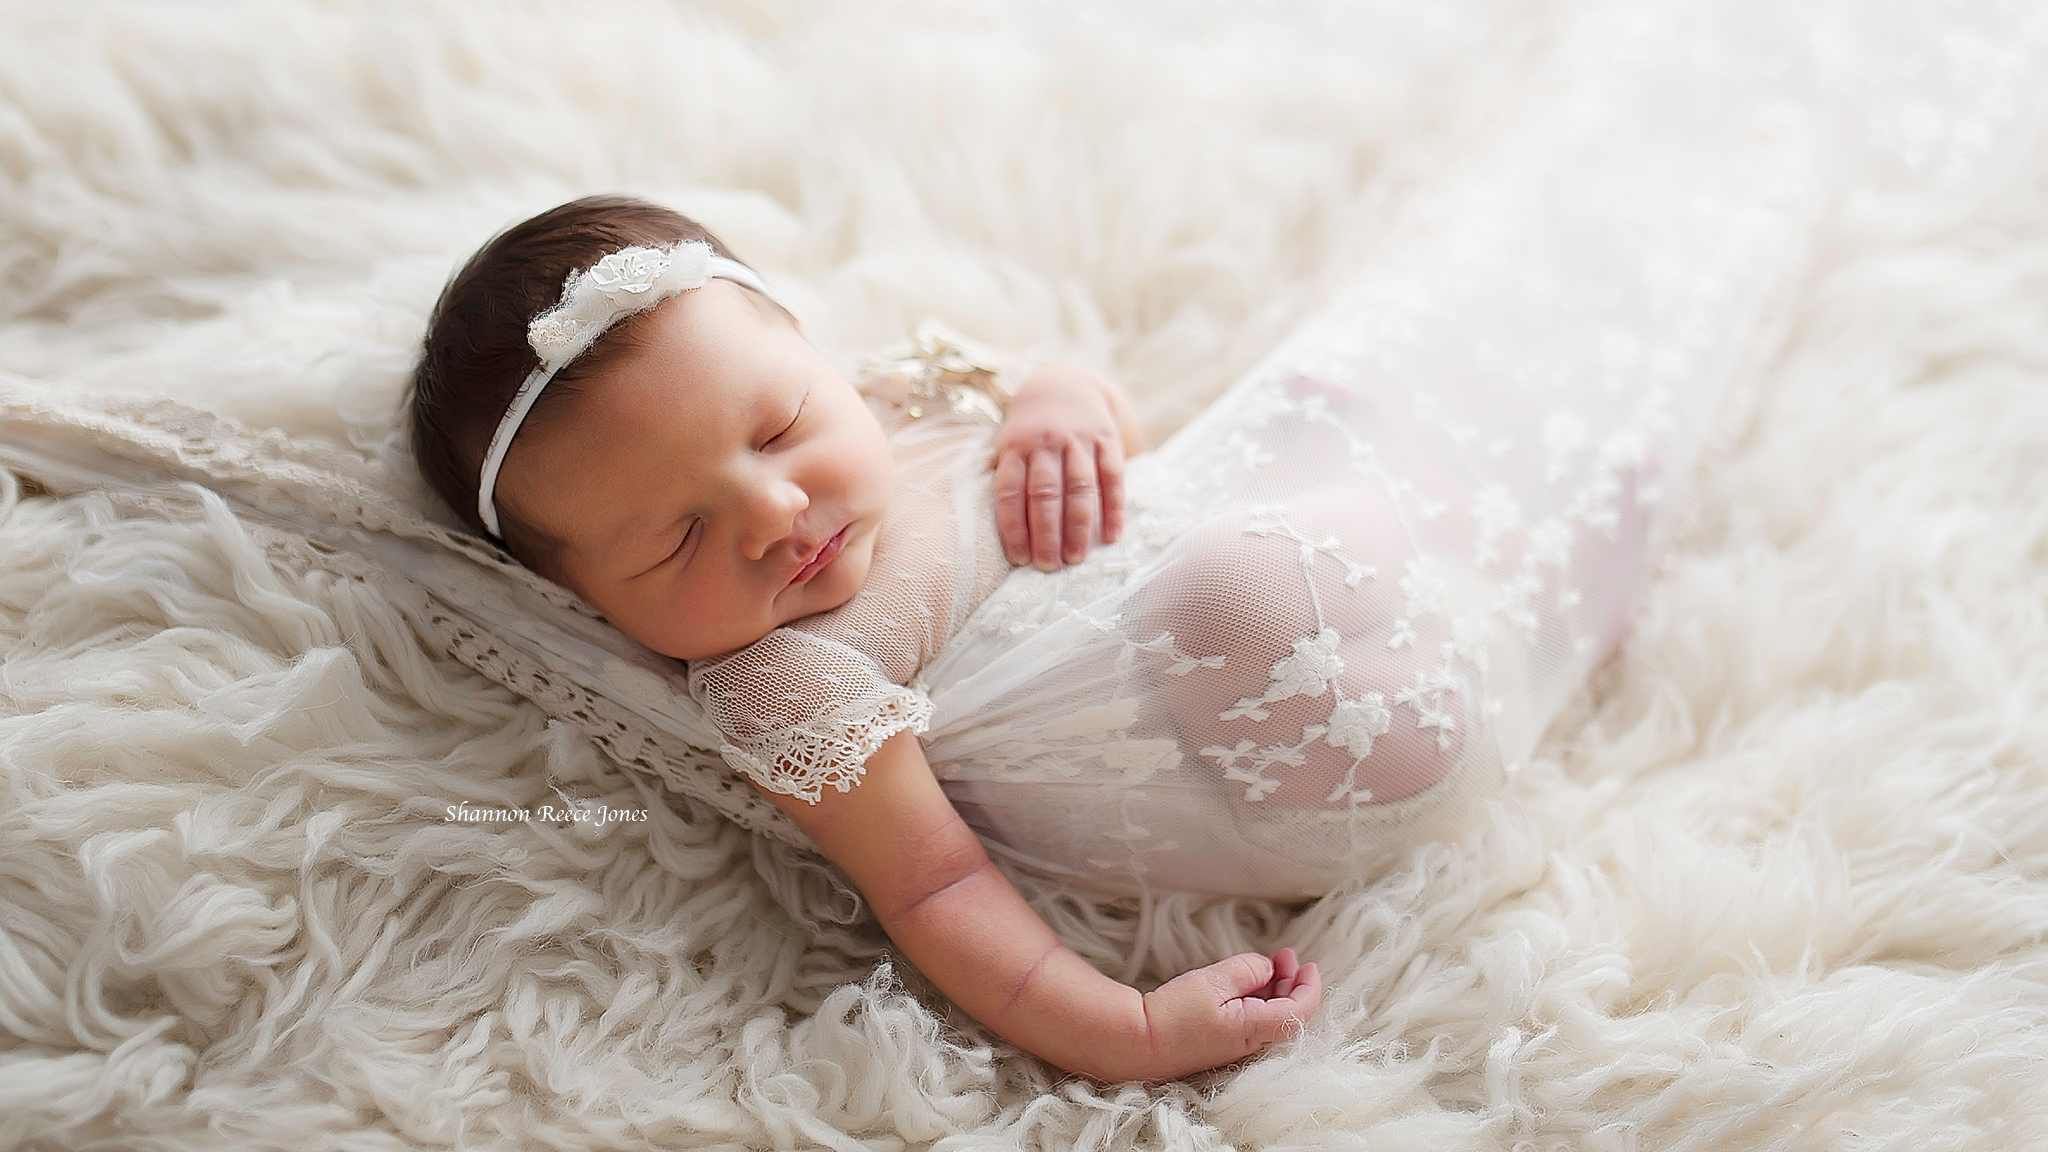 infant girl asleep in white lace